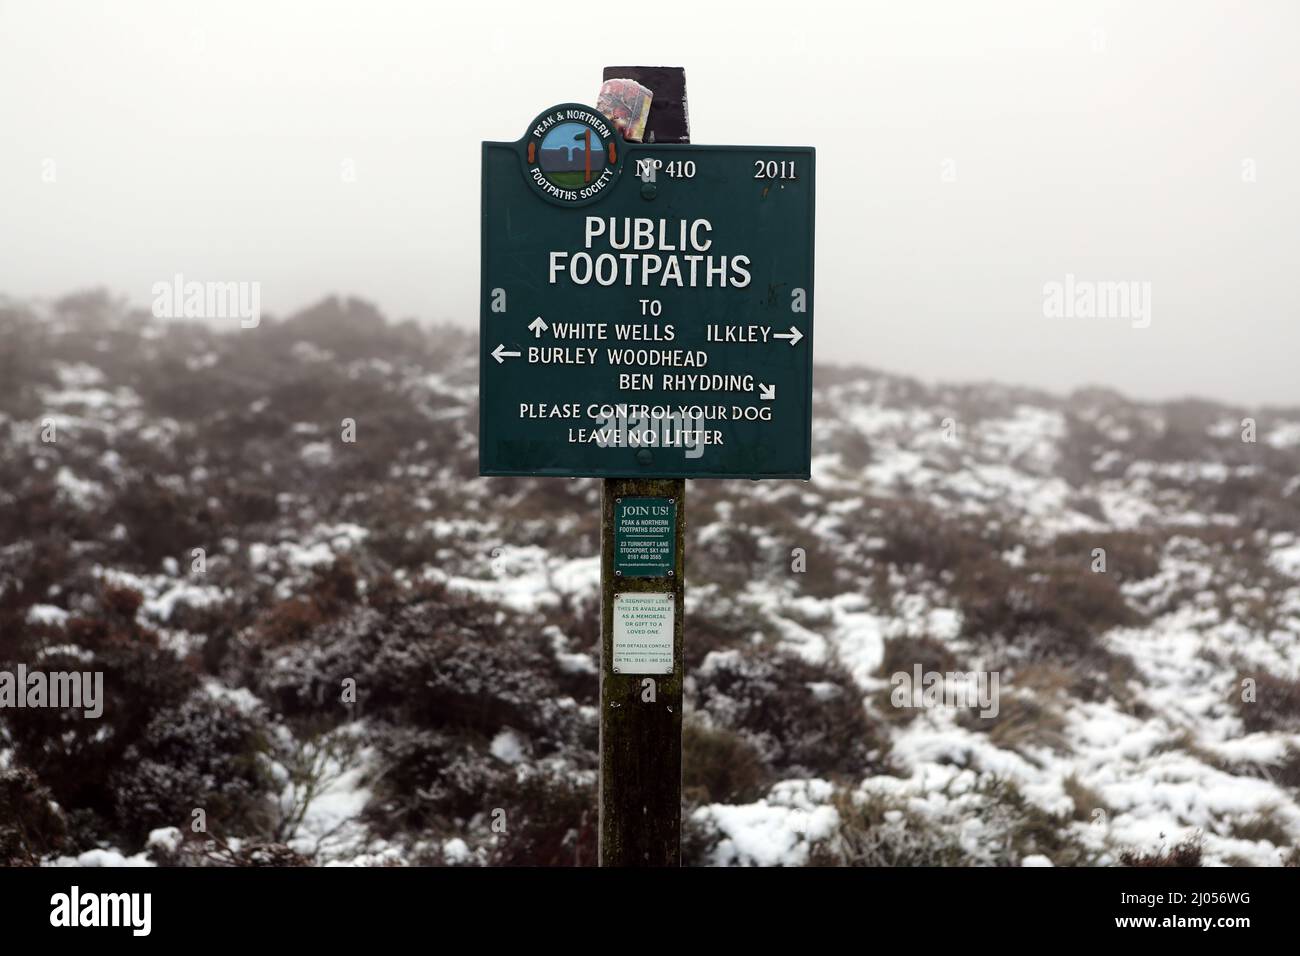 A public footpaths sign in Ilkley Moor in West Yorkshire. Stock Photo